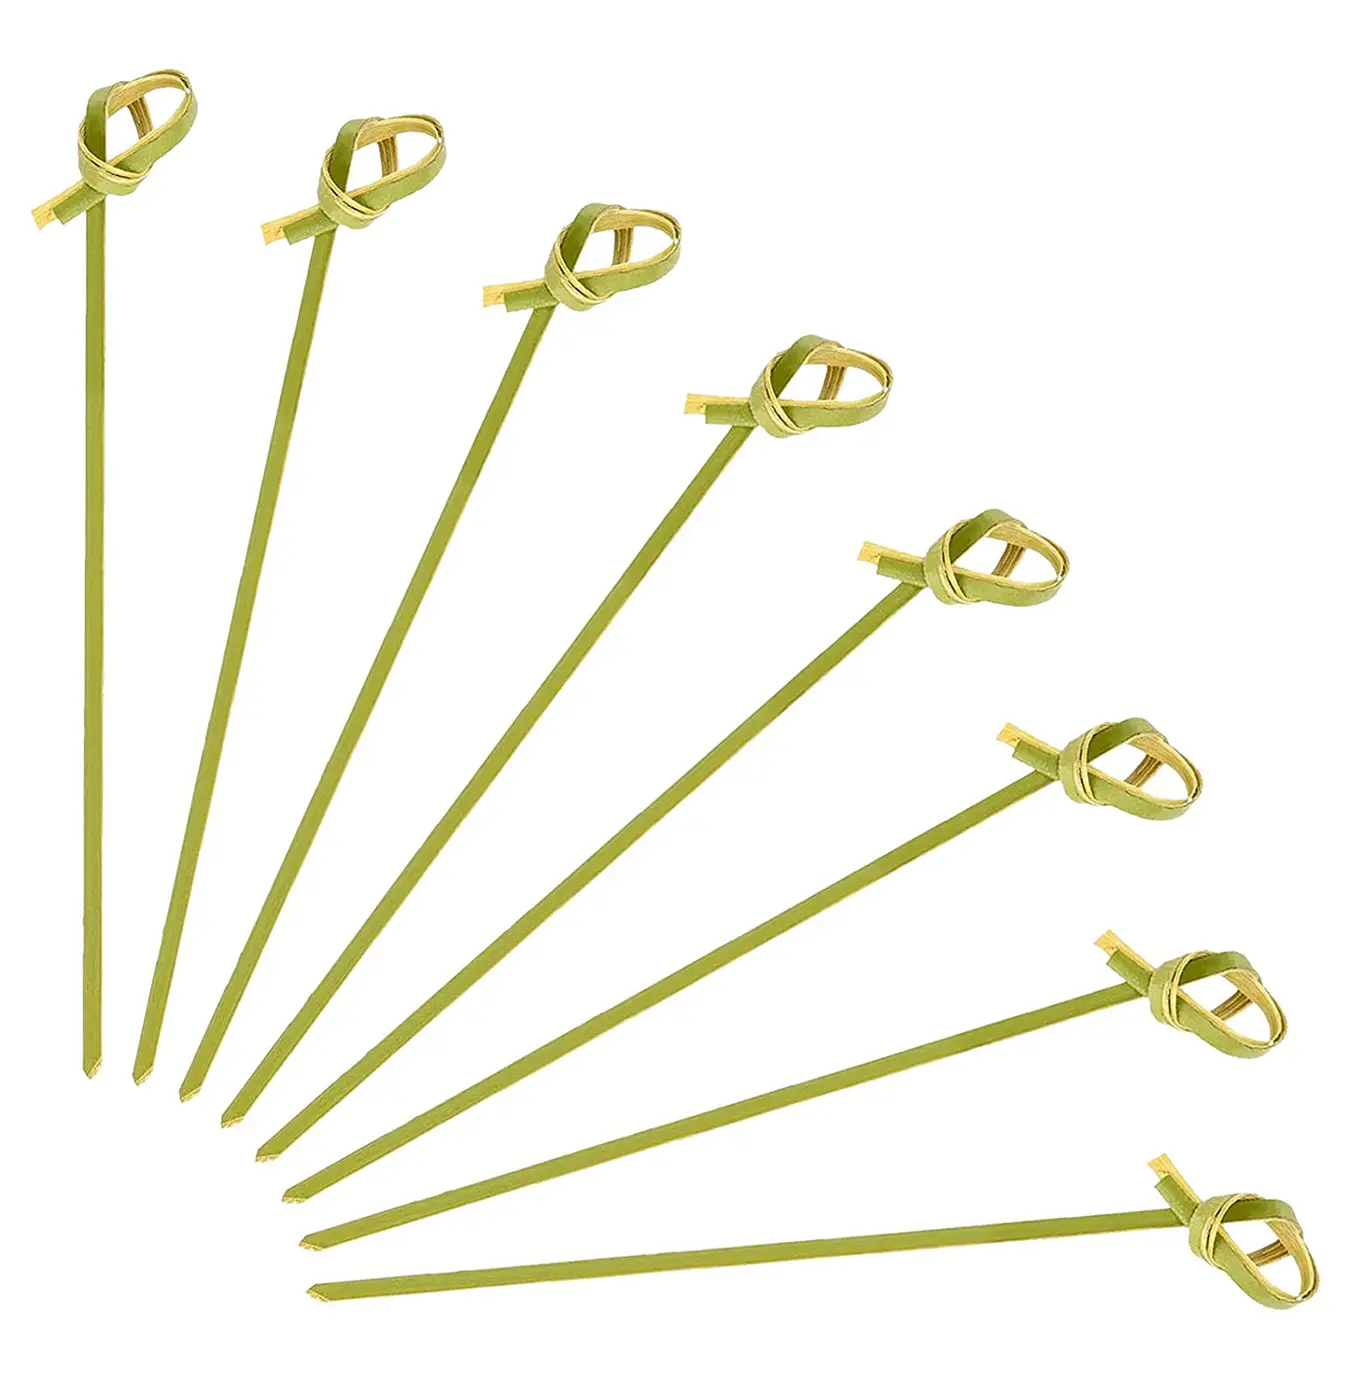 Bamboo Knot Cocktail Skewers Picks 5 Inches Food Stick Skewer Fruit Picking Stick Great For Party BBQ Snacks Sandwiches